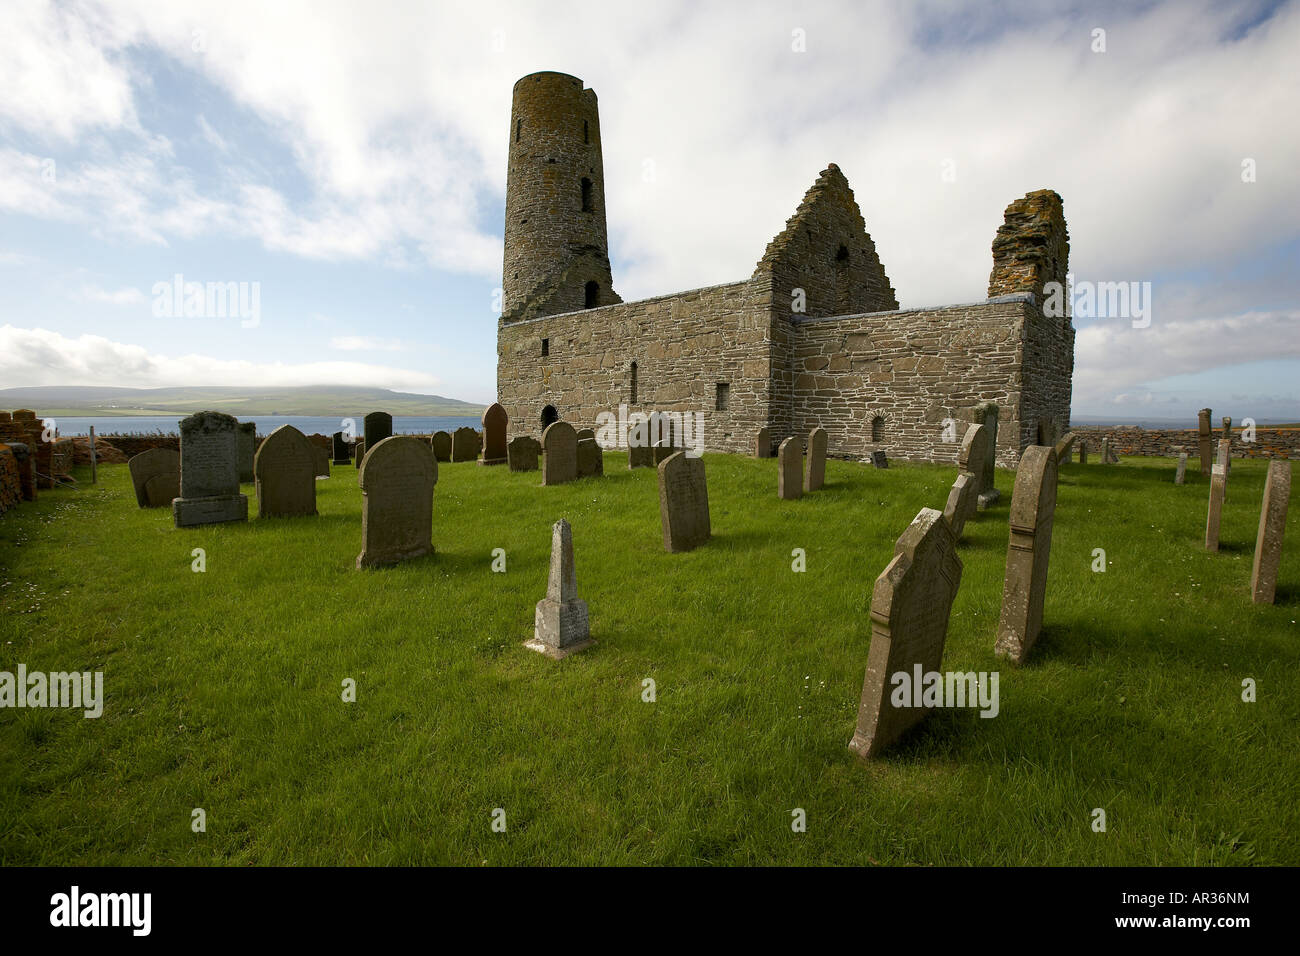 The 12th century St Magnus kirk and tower 14 9m high Egilsay Island Orkney Scotland UK Stock Photo